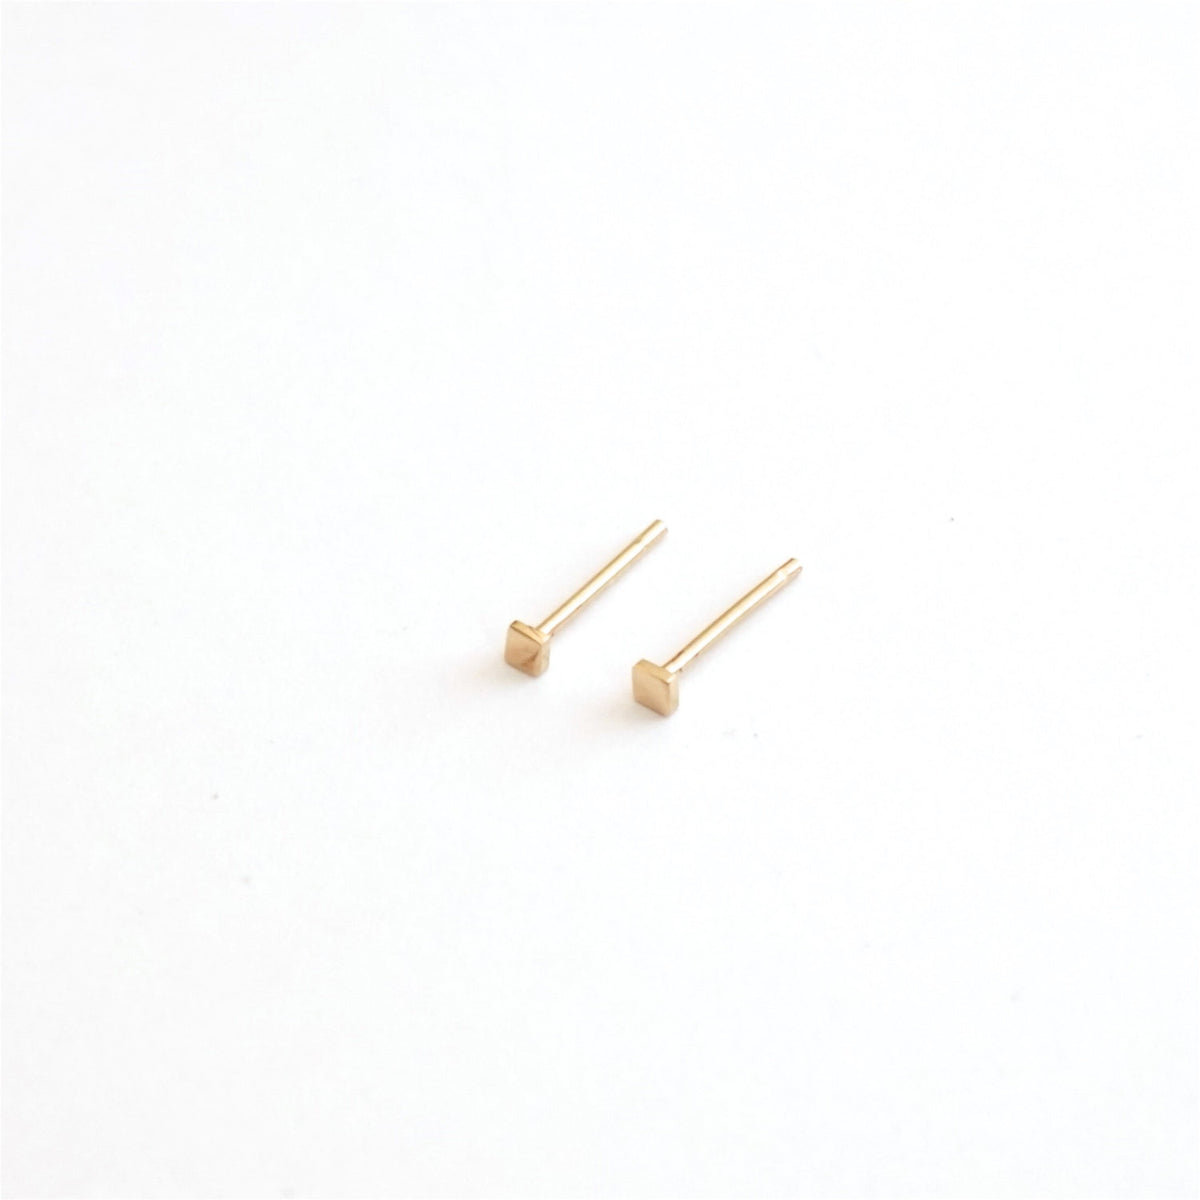 Contemporary Classic Hand-Made Square 14K Gold Stud Earrings  -  0151 - Virginia Wynne Designs